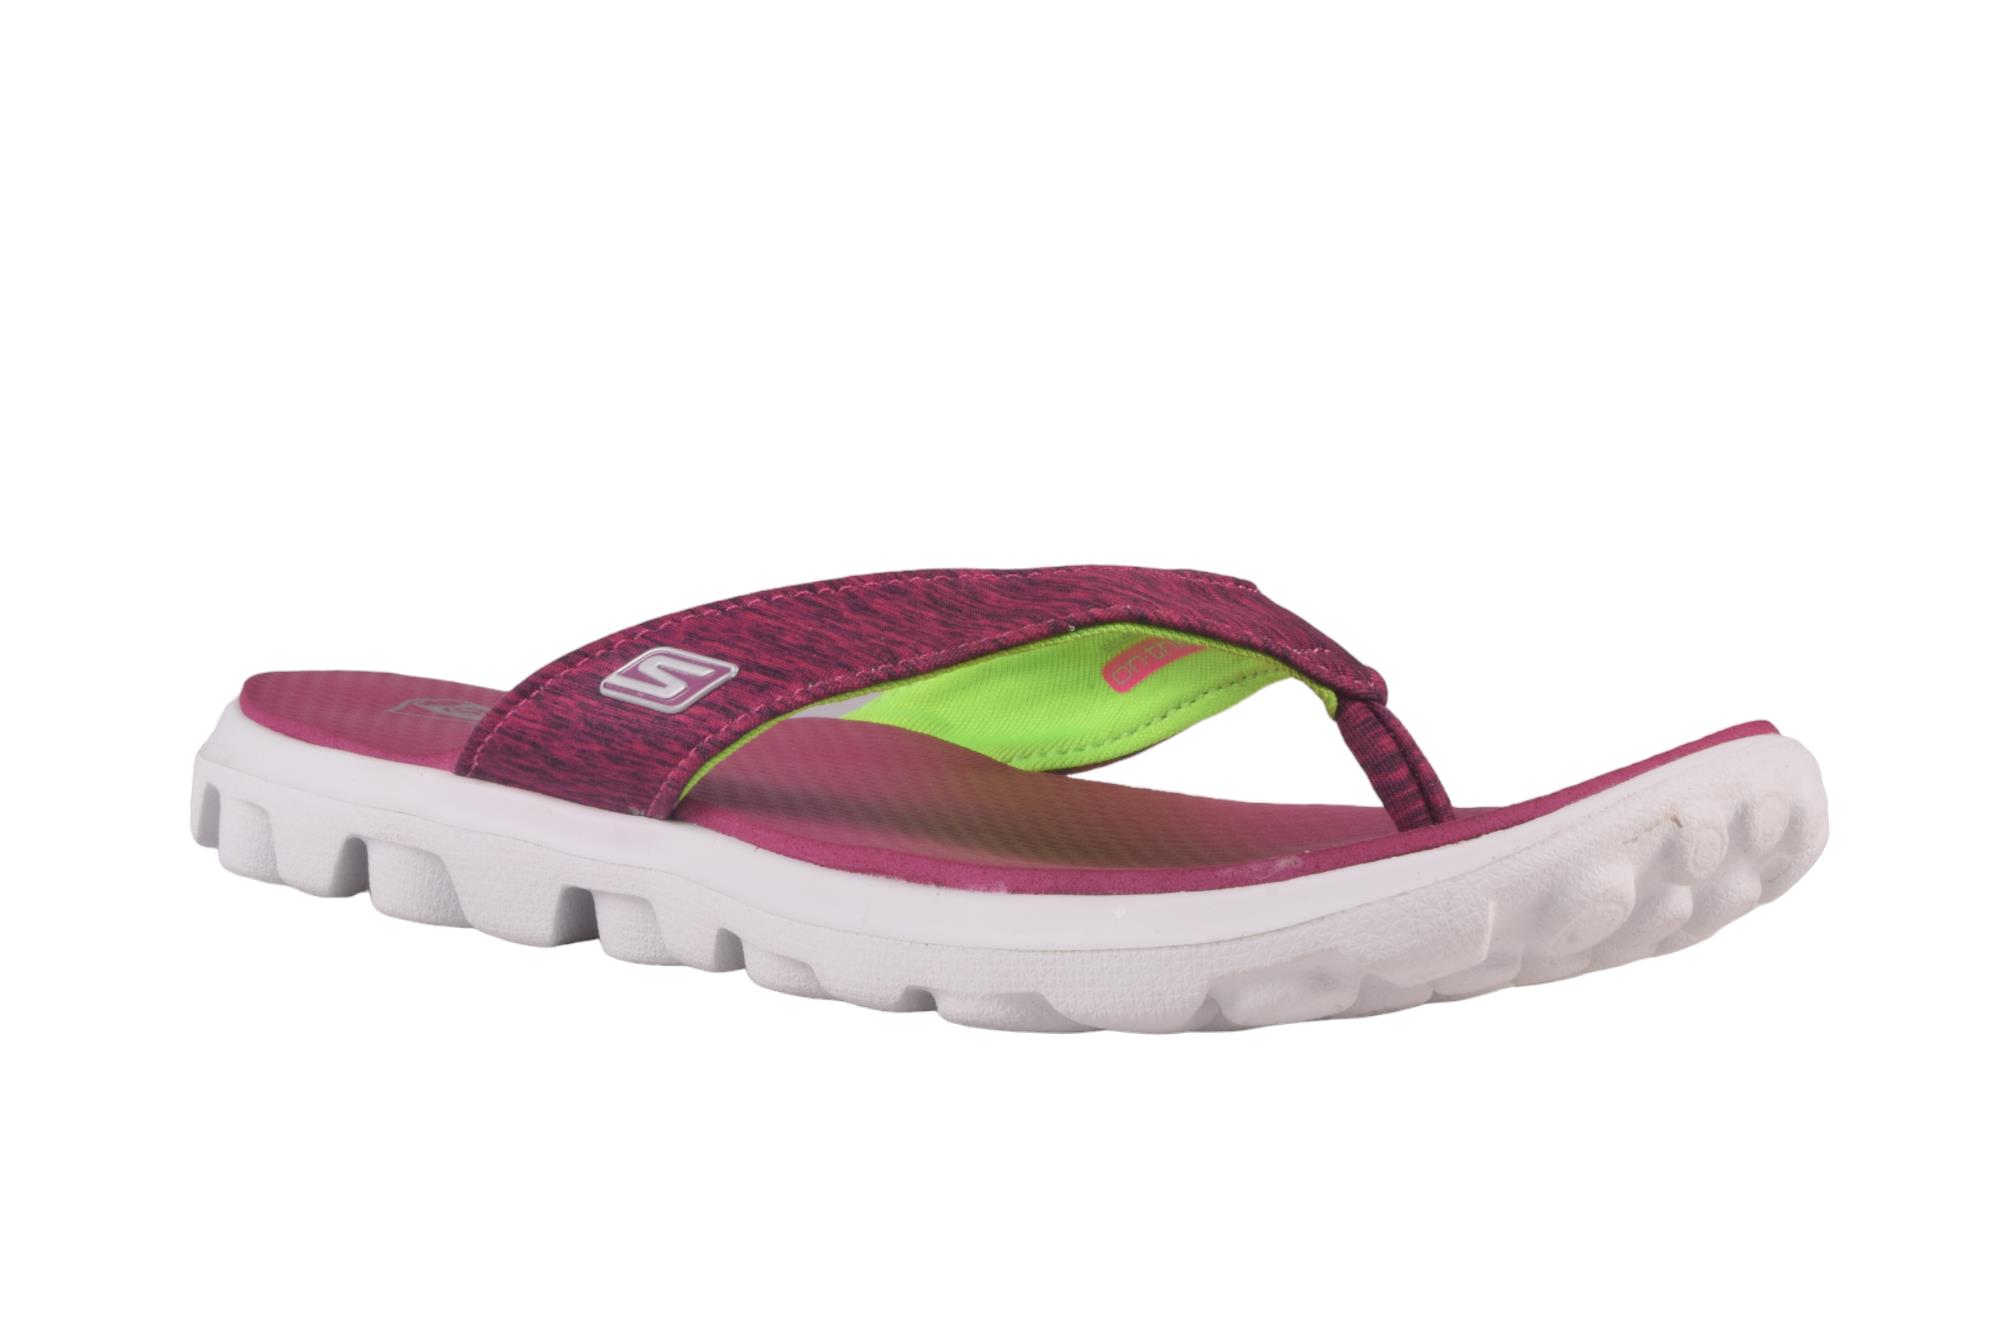 Skechers PINK SLIPPERS ::PARMAR BOOT HOUSE | Buy Footwear and Accessories  For Men, Women & Kids | Hausschuhe